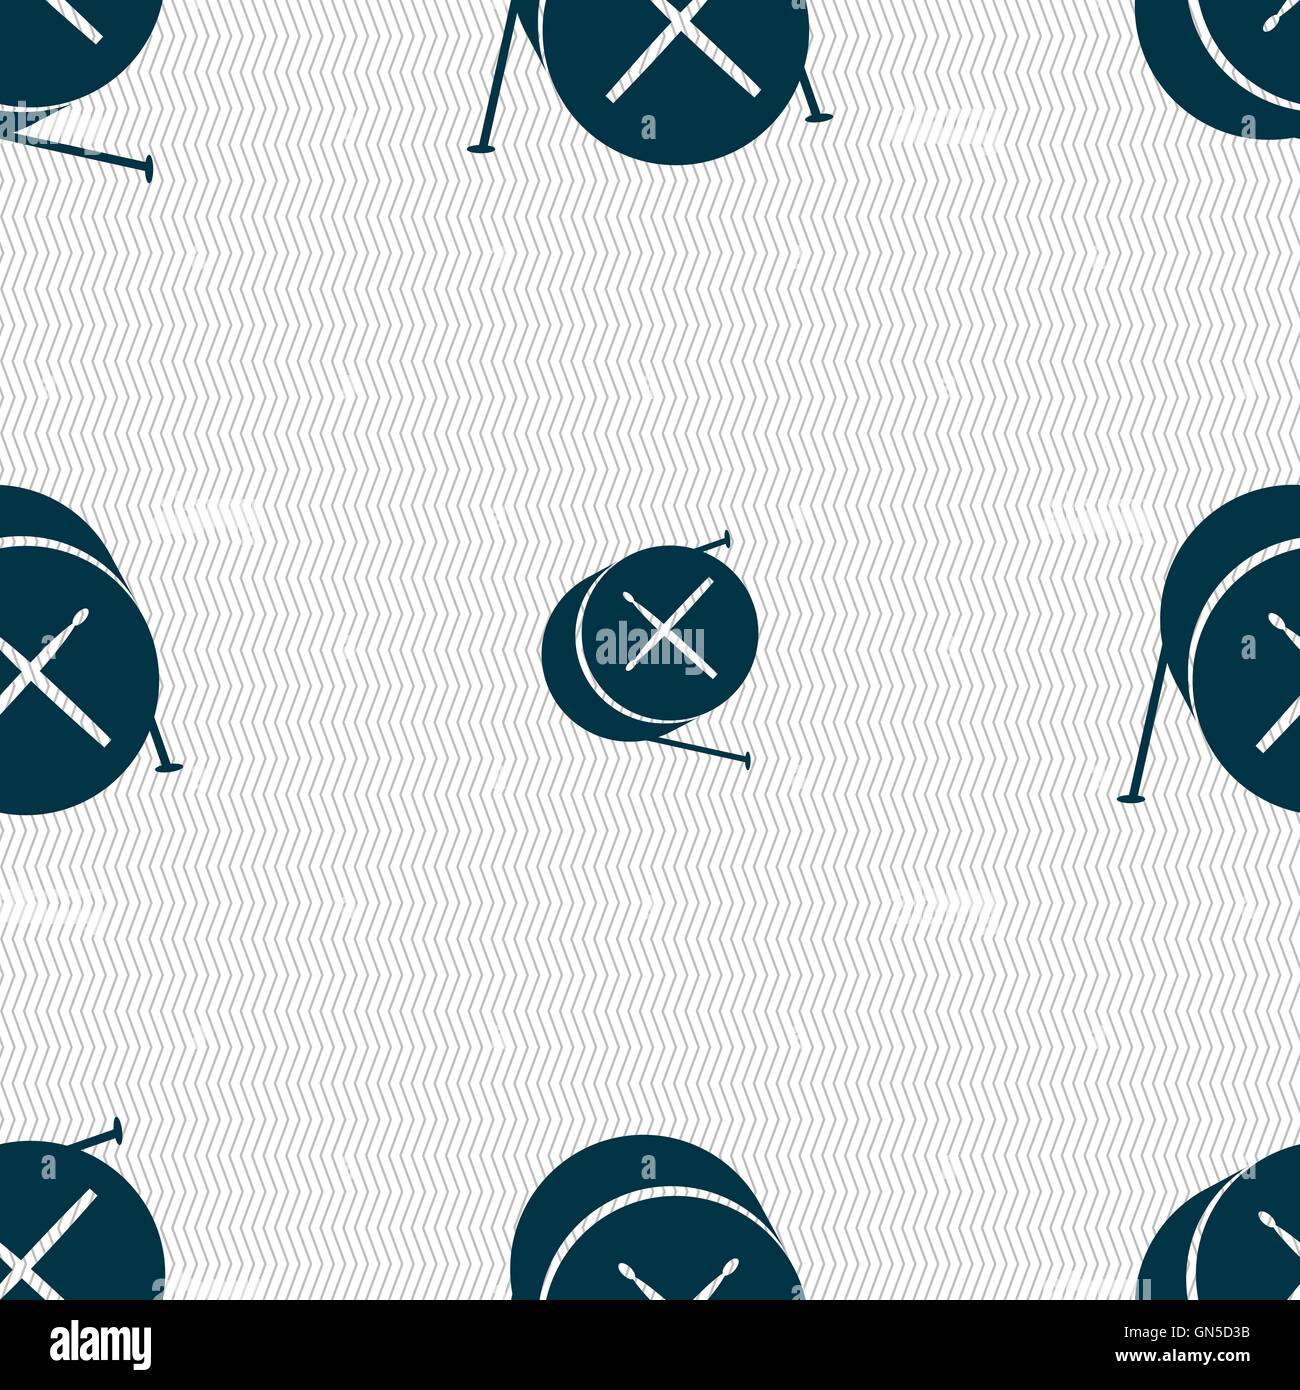 Drum icon sign. Seamless pattern with geometric texture. Vector Stock Vector